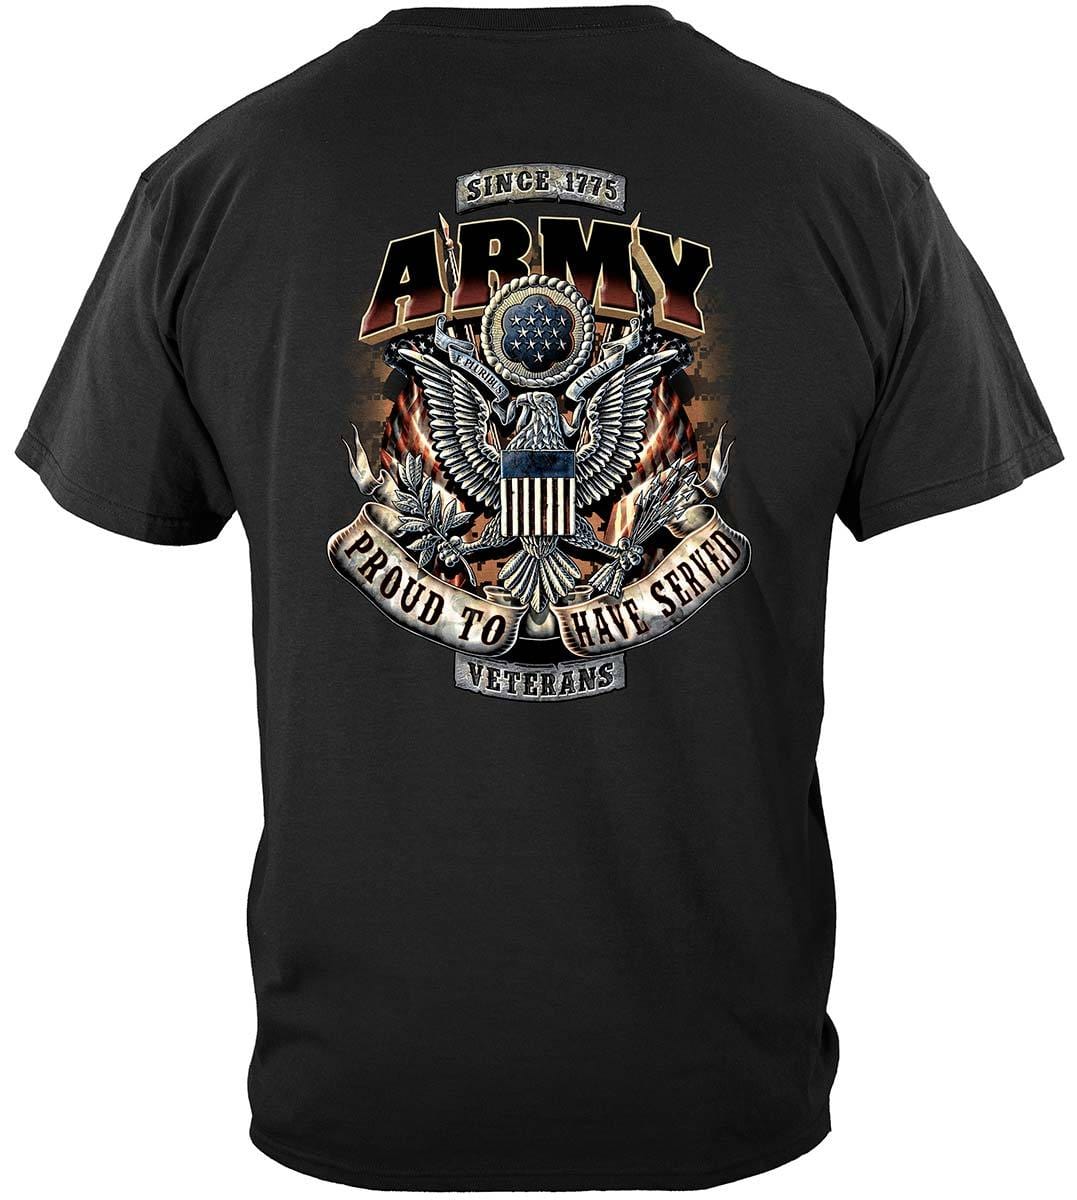 Army Proud To Have Served Premium Long Sleeves